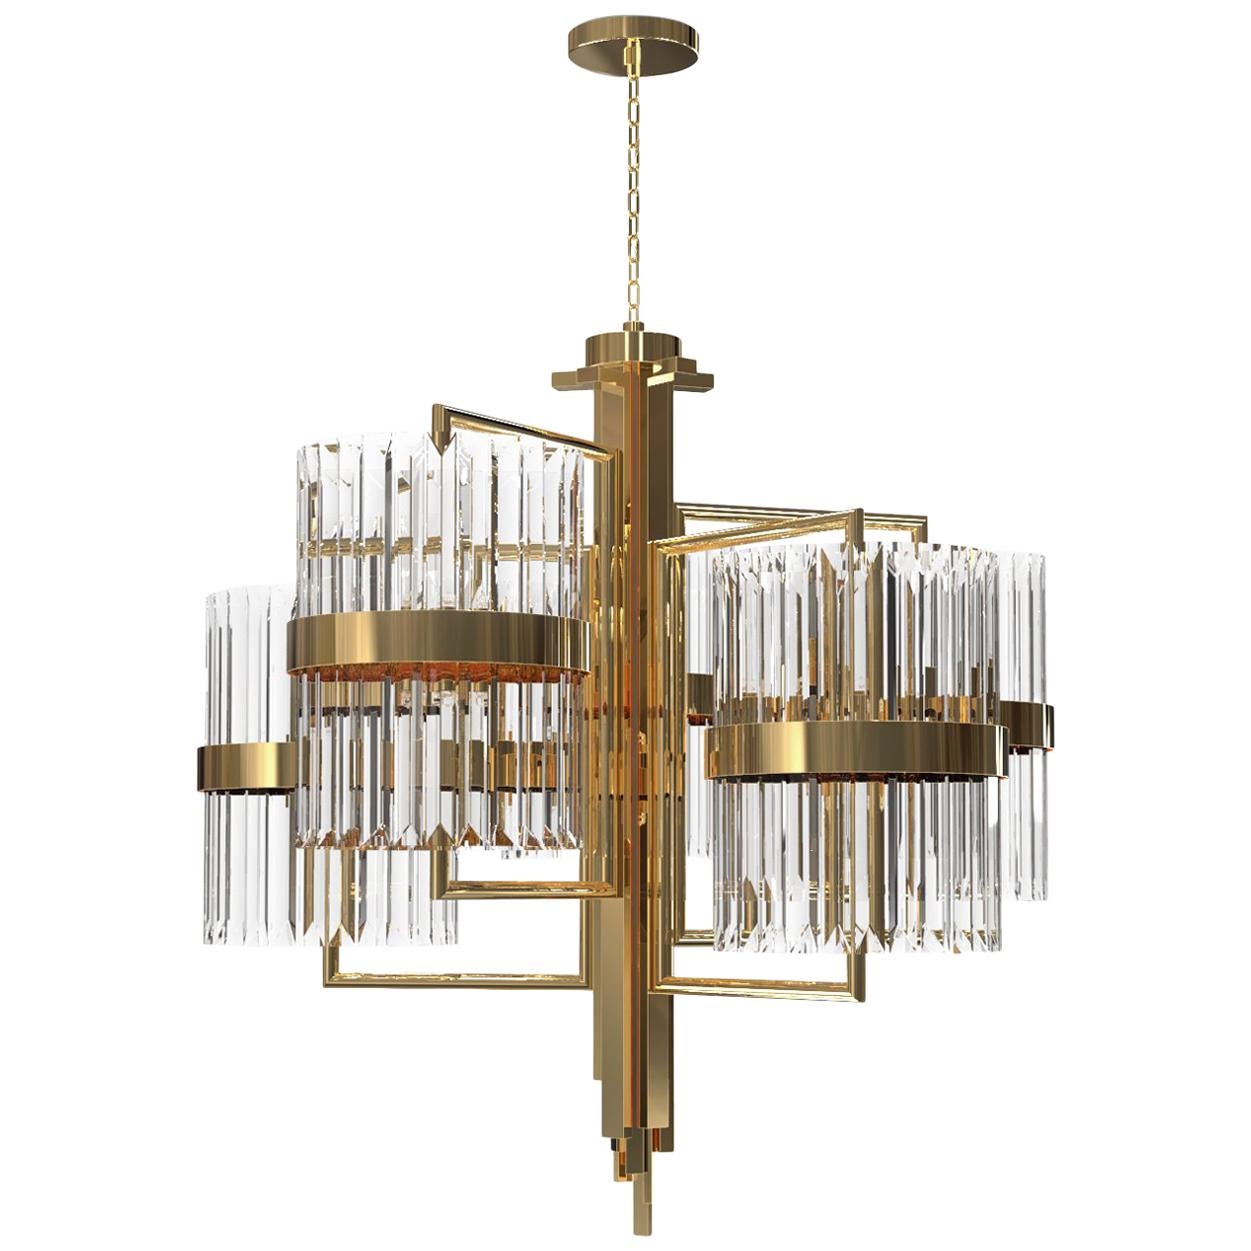 Luxxu Liberty II Pendant Light in Brass with Crystal Glass Details For Sale